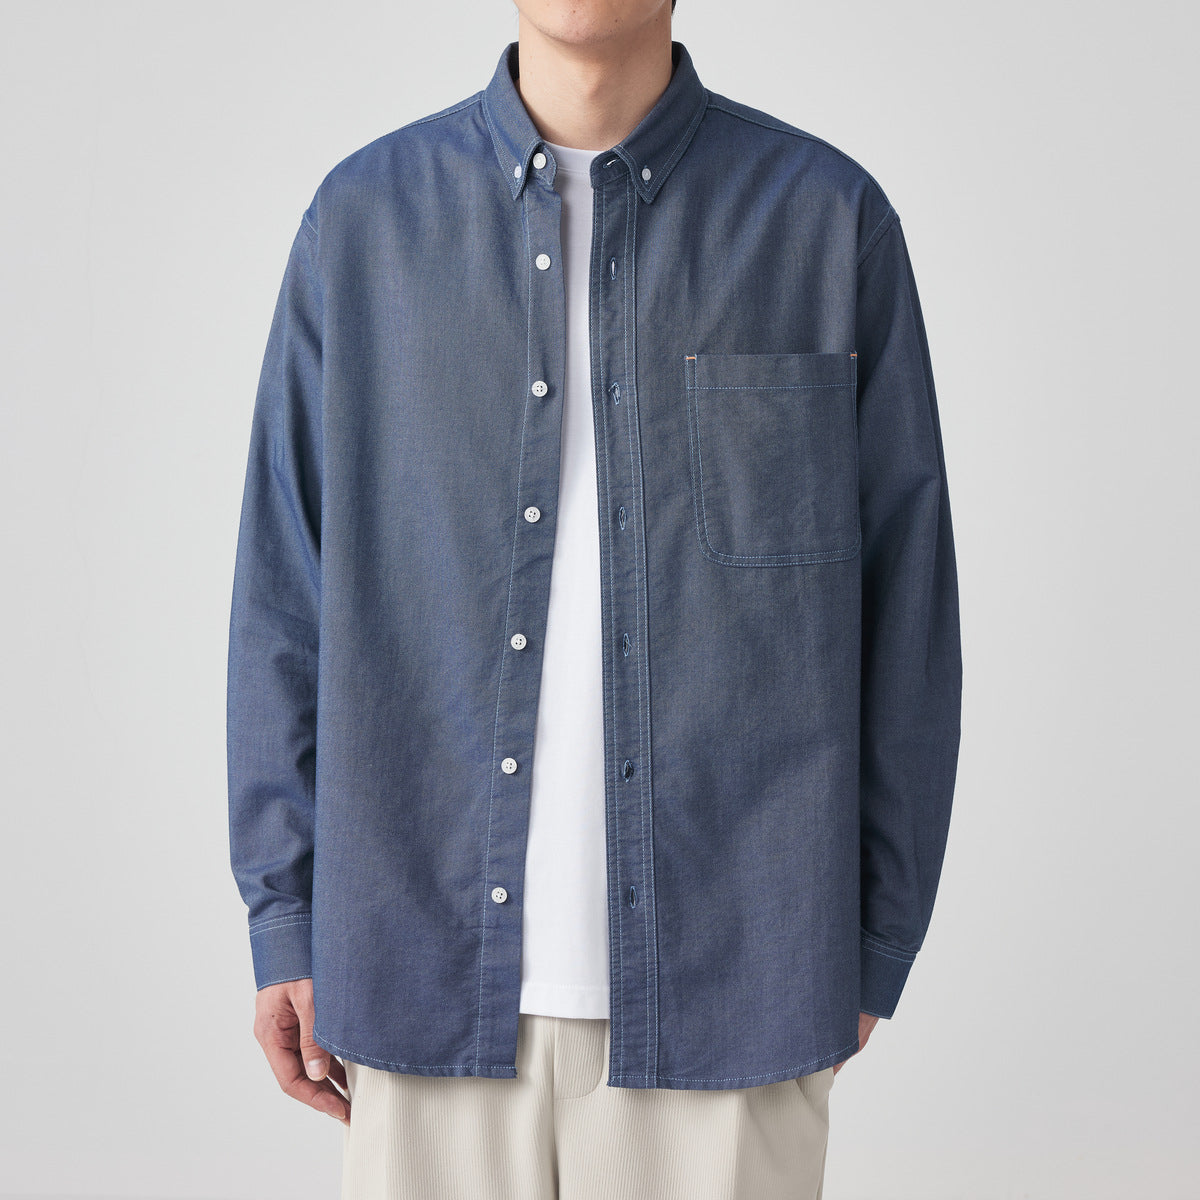 Oxford Long Sleeve Shirt Simple Solid Color